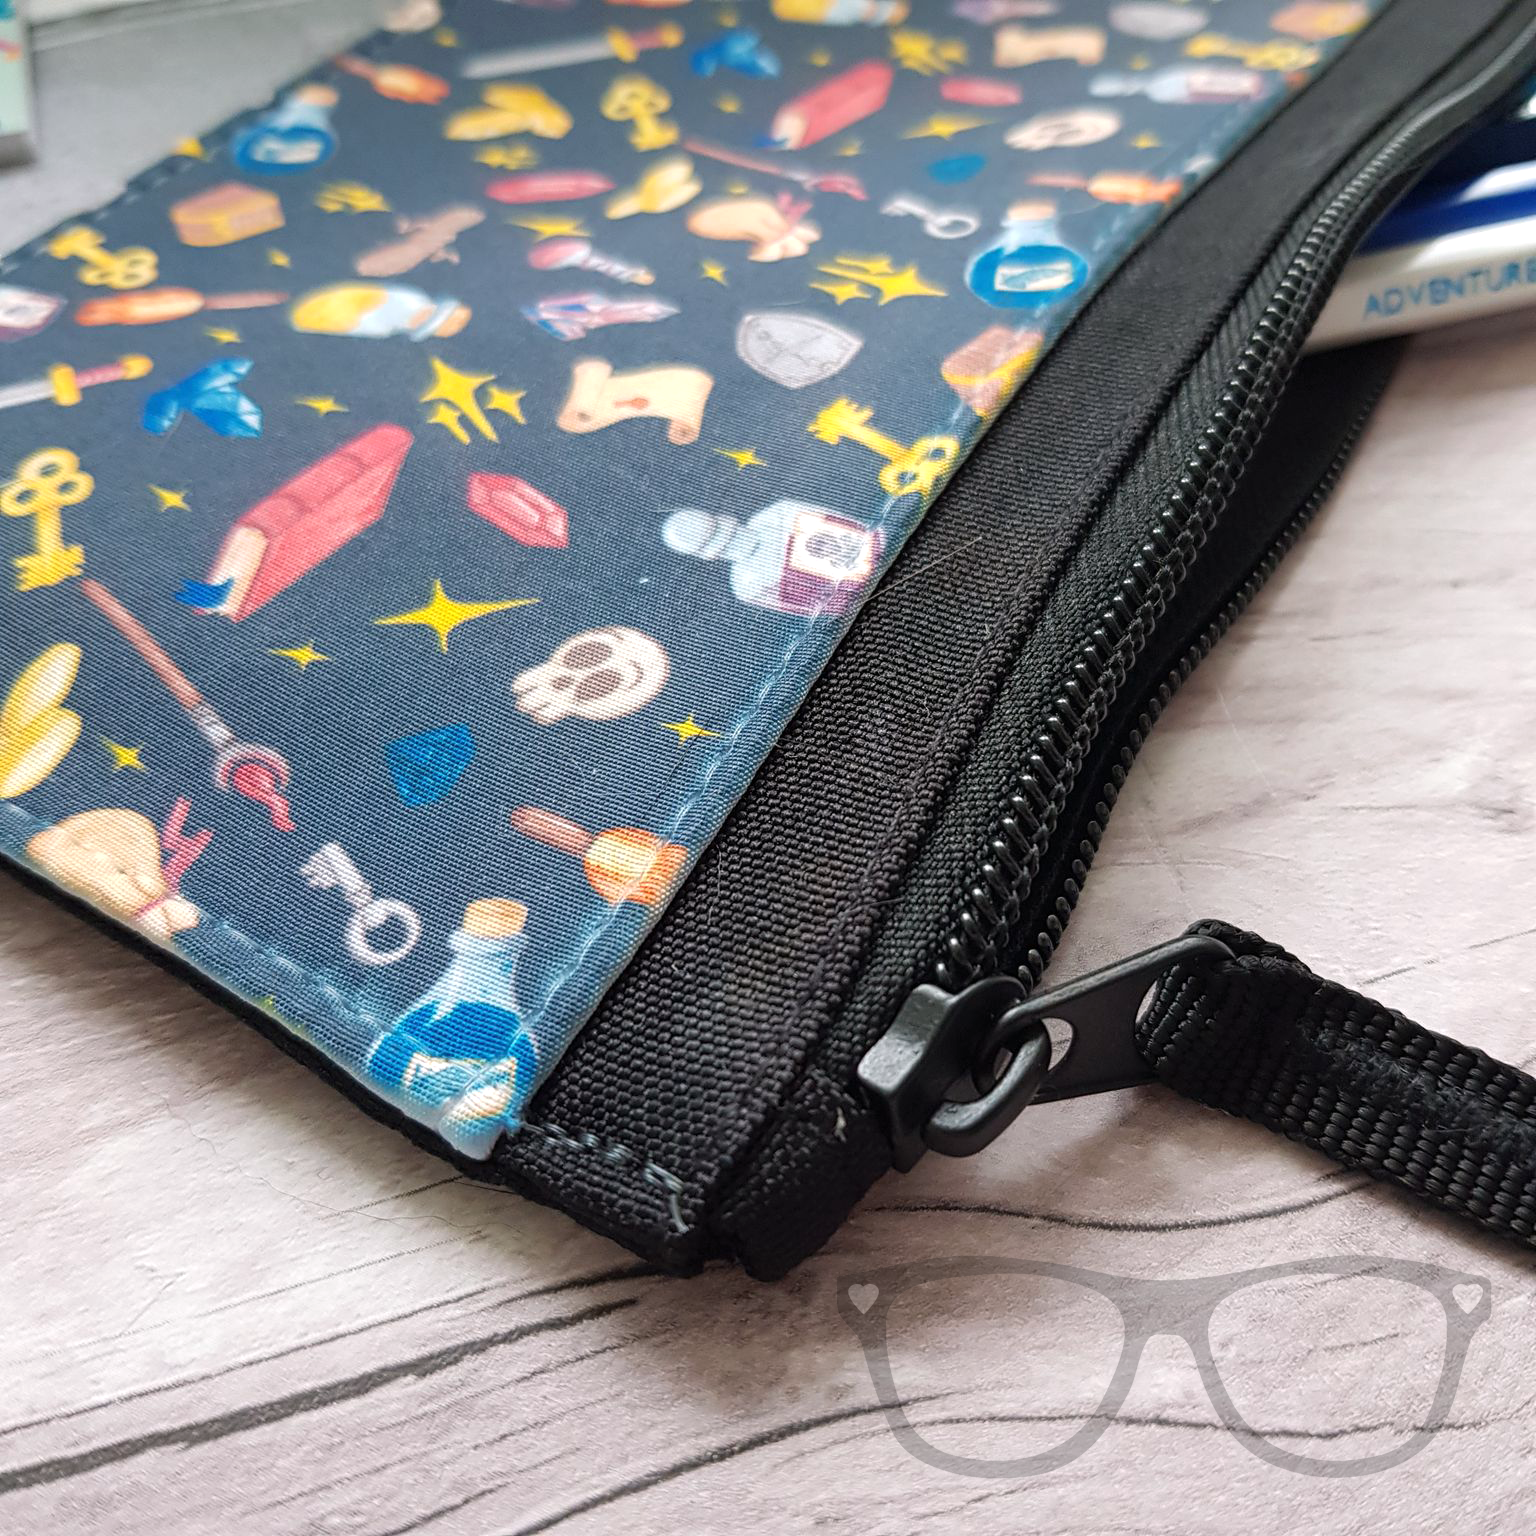 Close up detail of the fantasy genre pencil case showing the black metal zip and the pattern of the pencil case